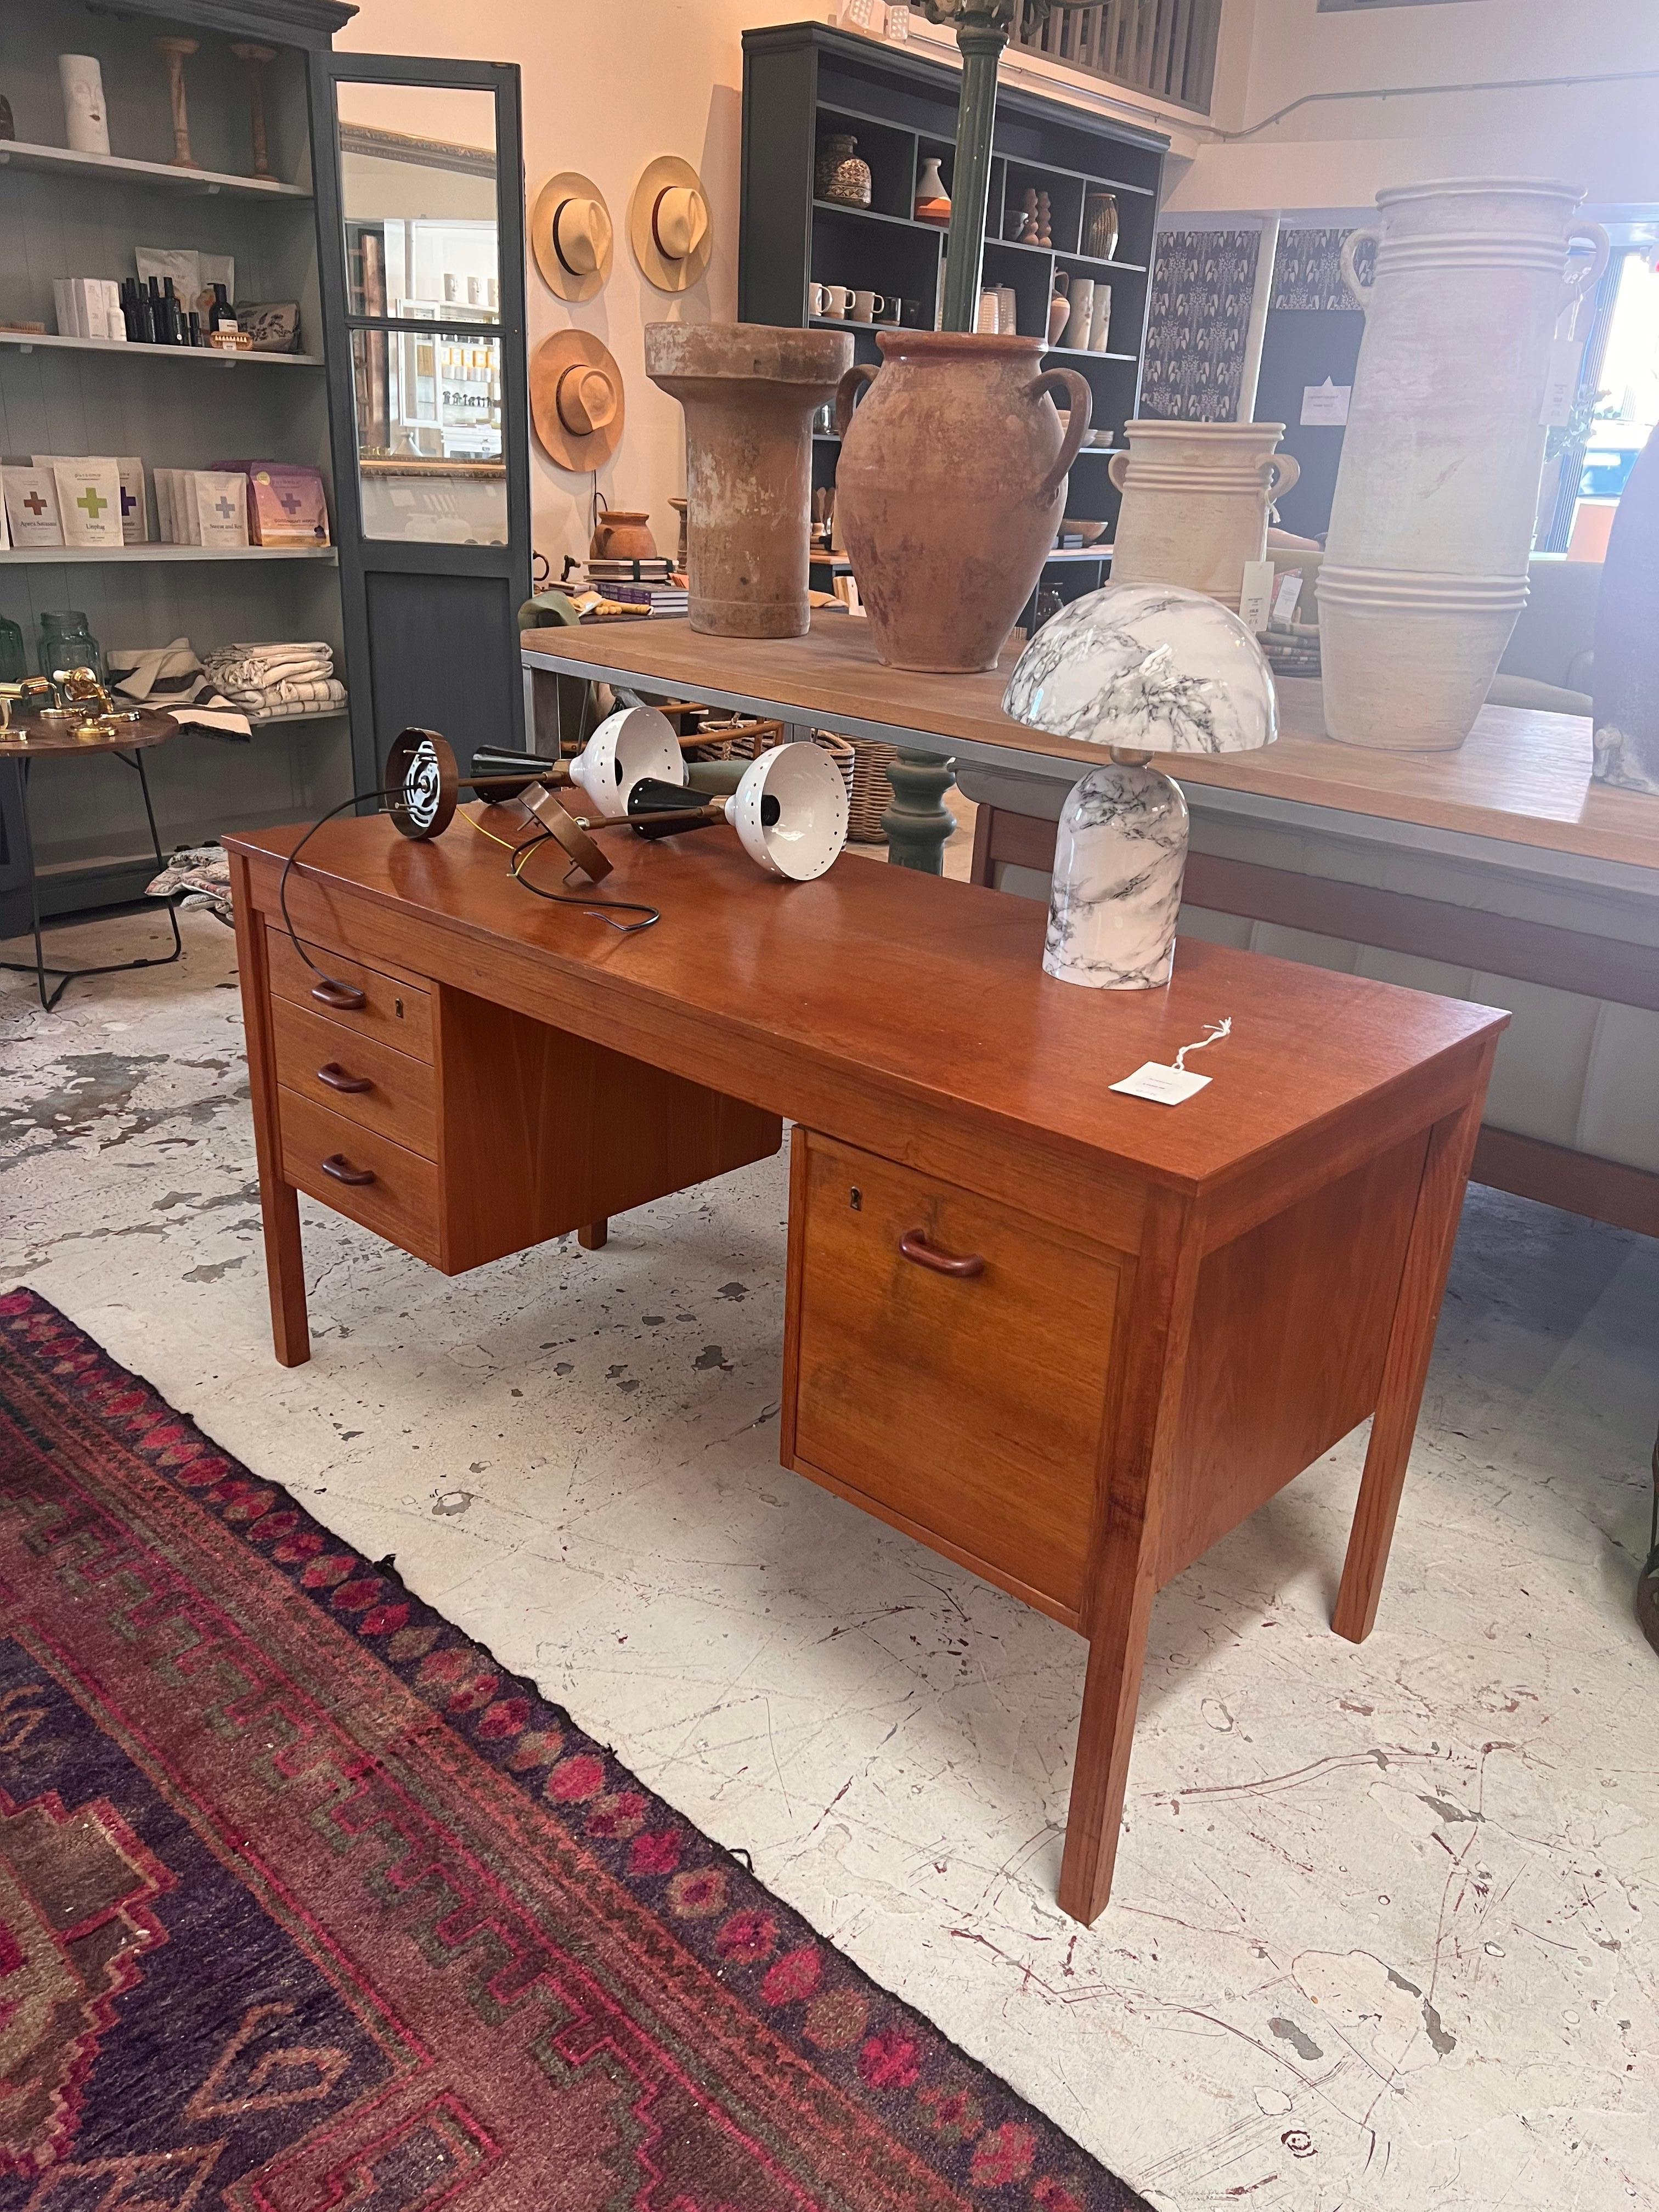 This authentic midcentury desk is perfect for any work space in the home. 

Dimensions: 50